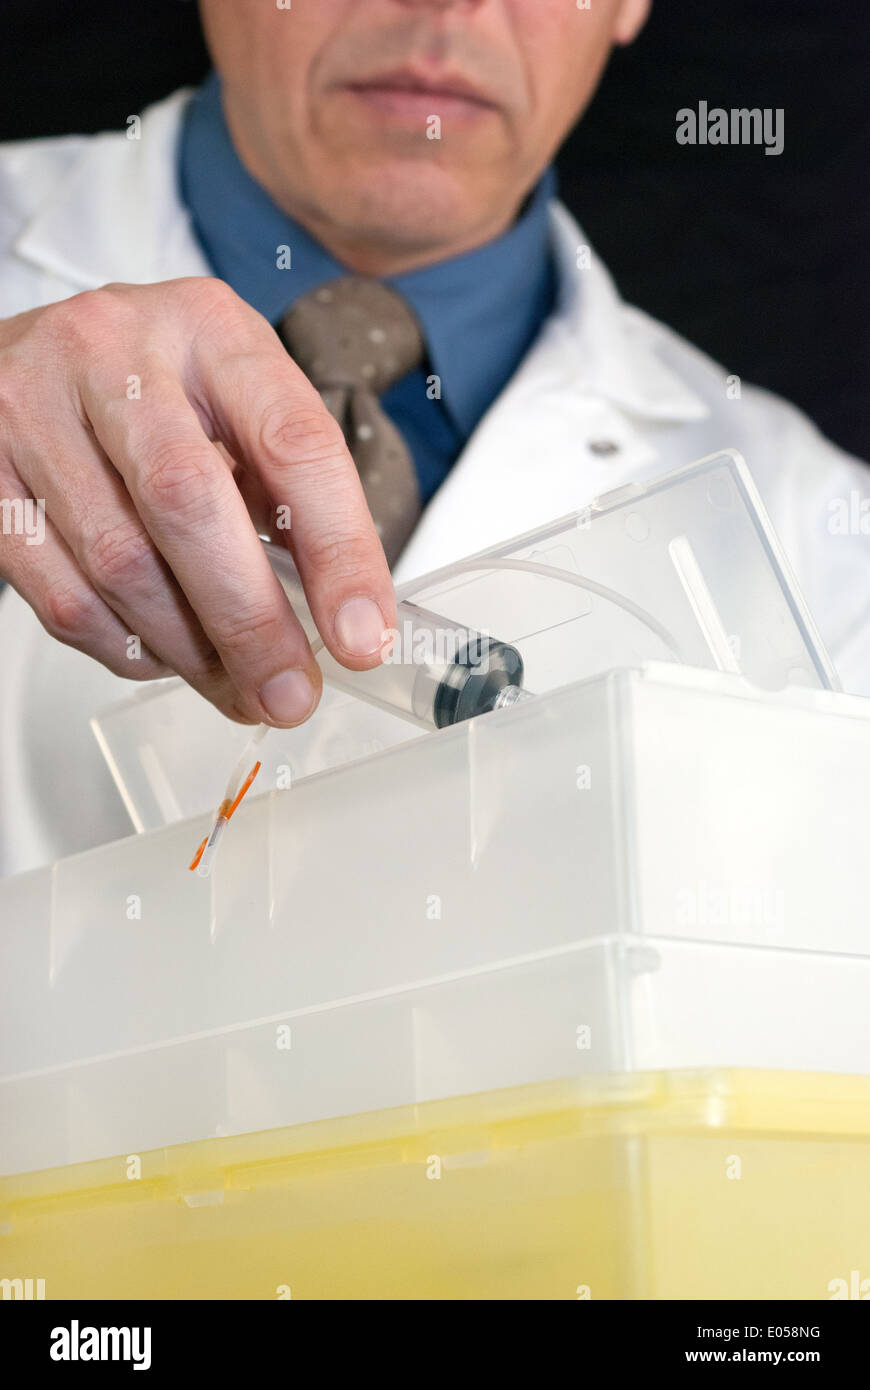 Close-up of a Doctor dropping a syringe with butterfly needle attached into sharps container. Stock Photo